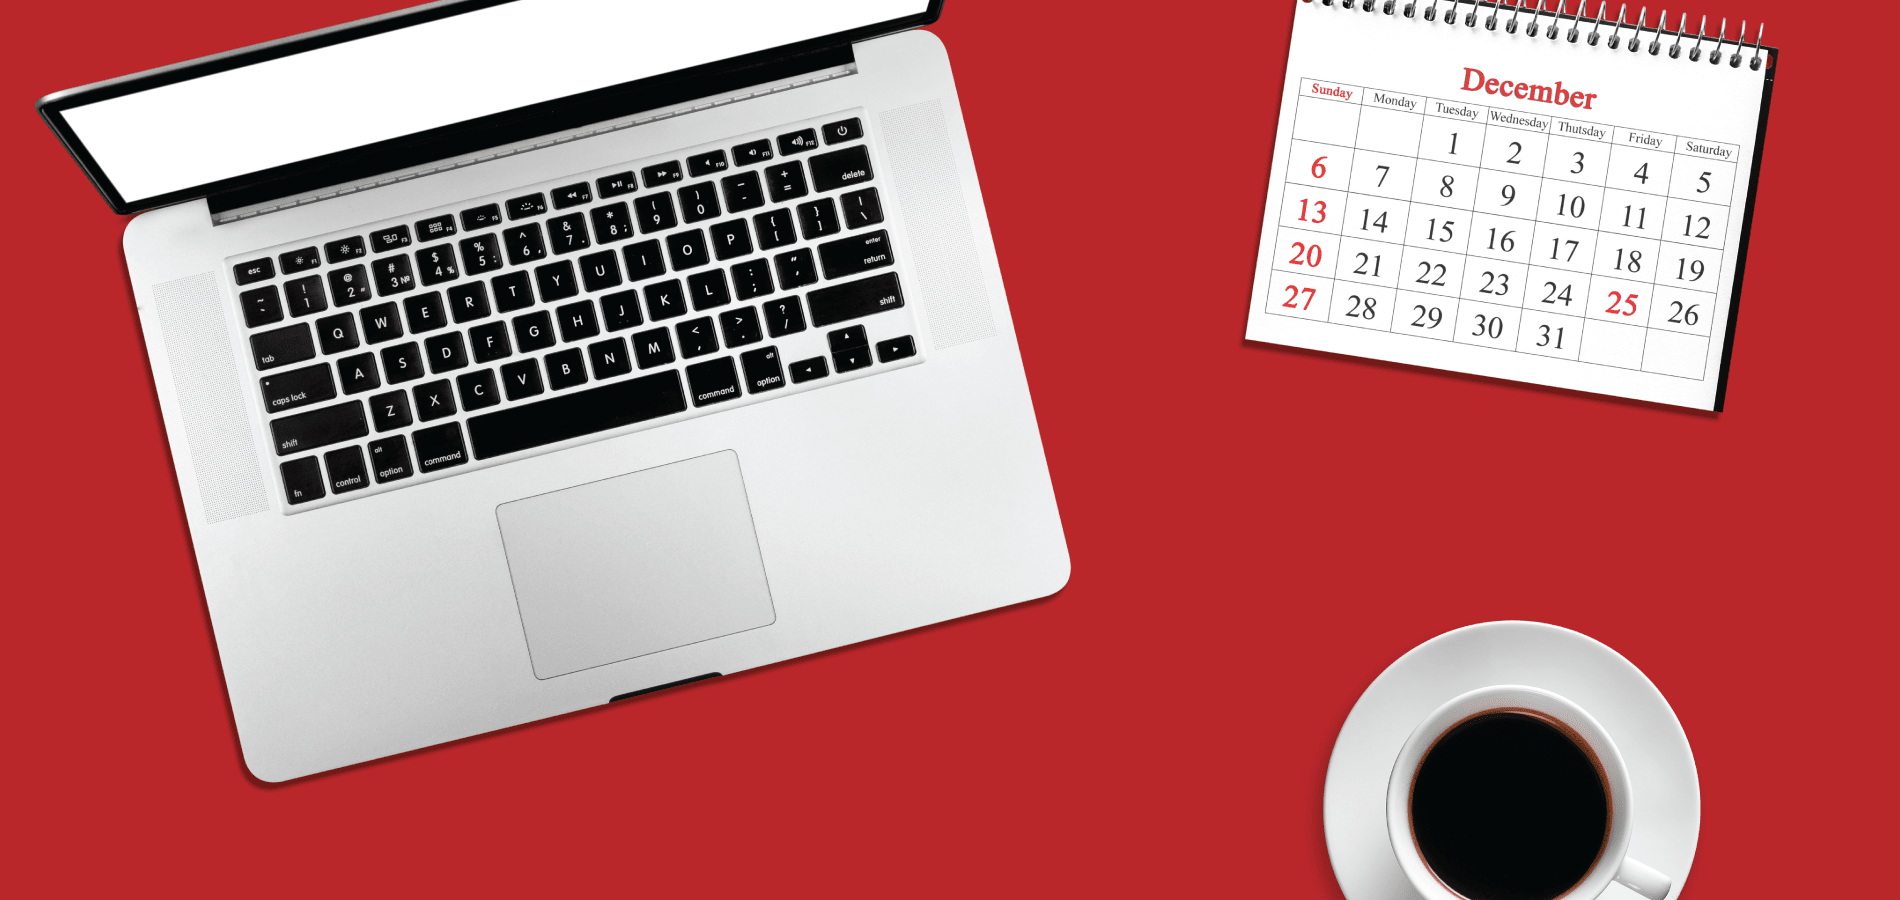 Computer, calendar, and coffee on red background